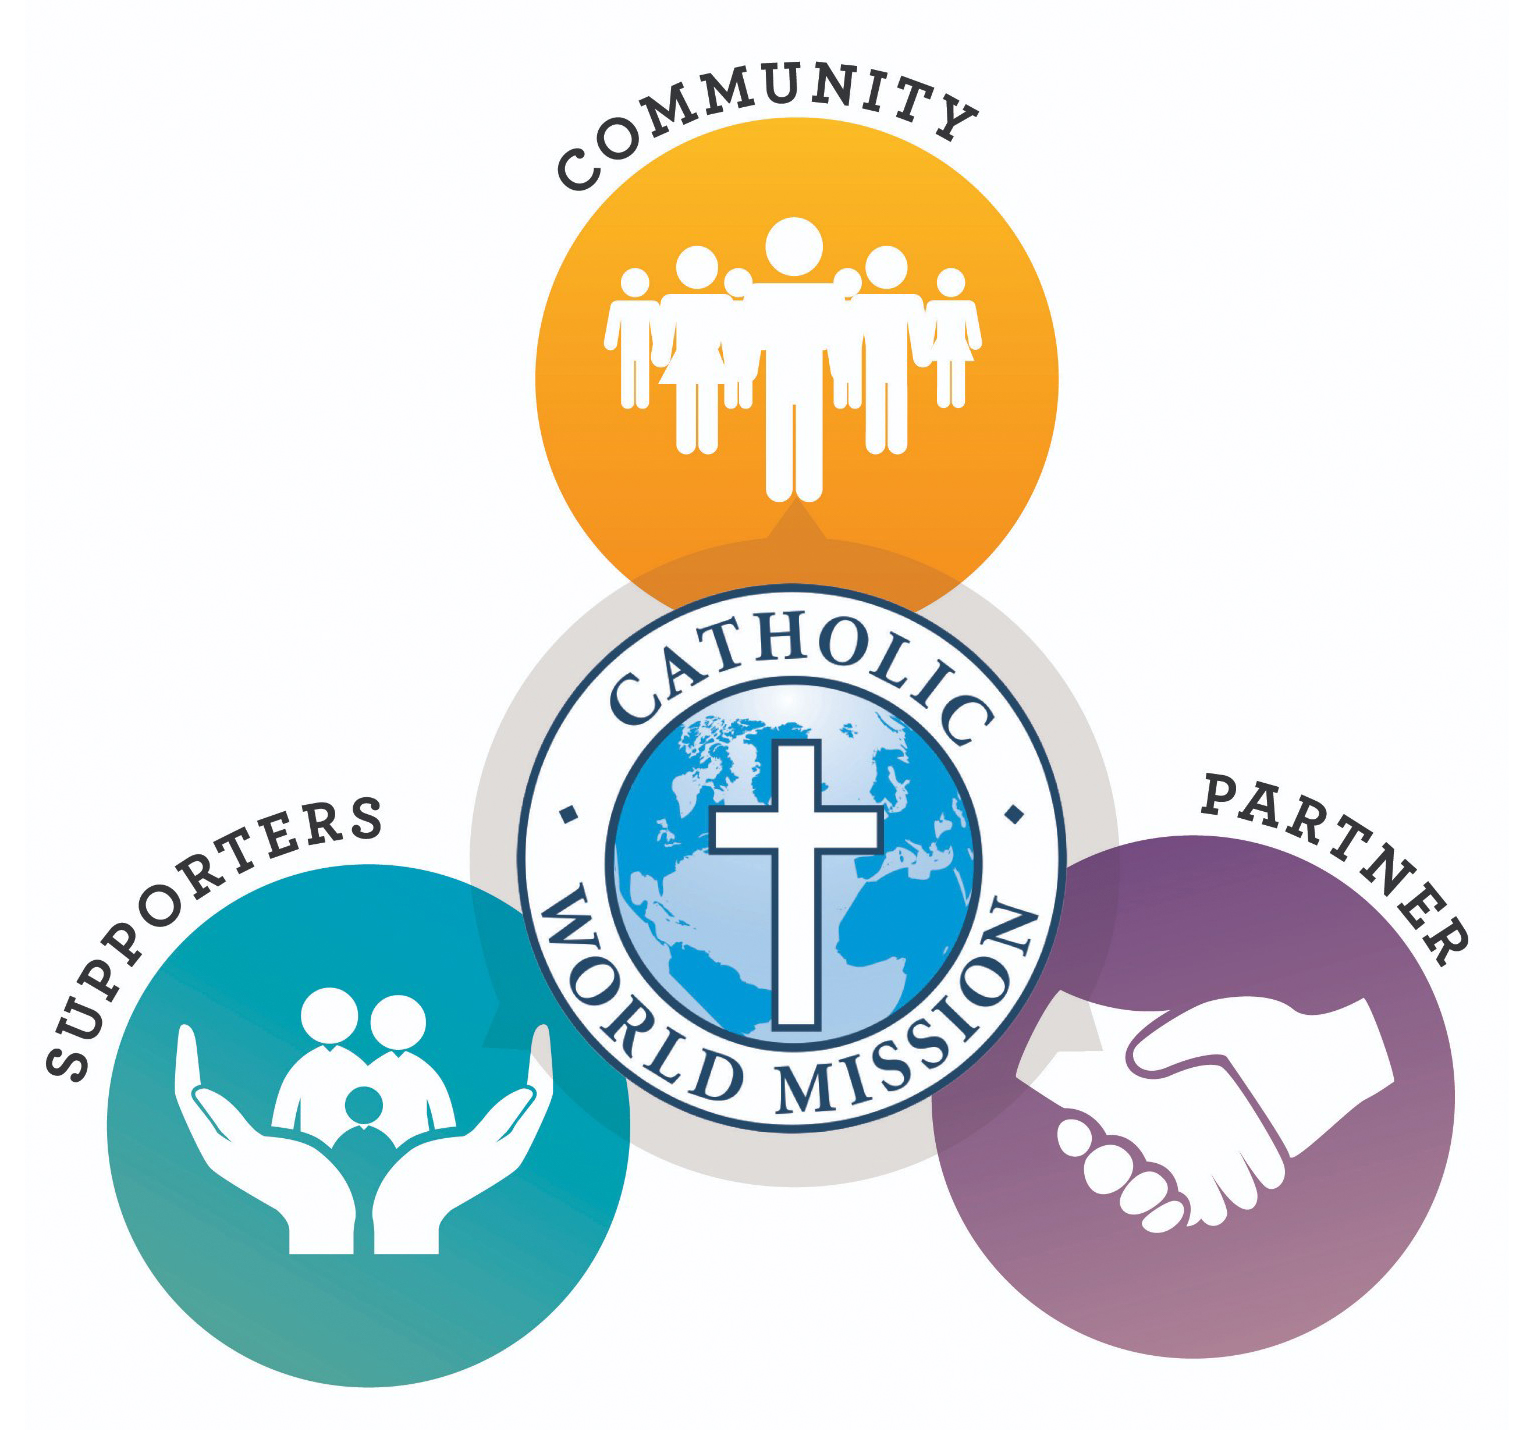 Trinitarian Approach involving community, supporters and partners